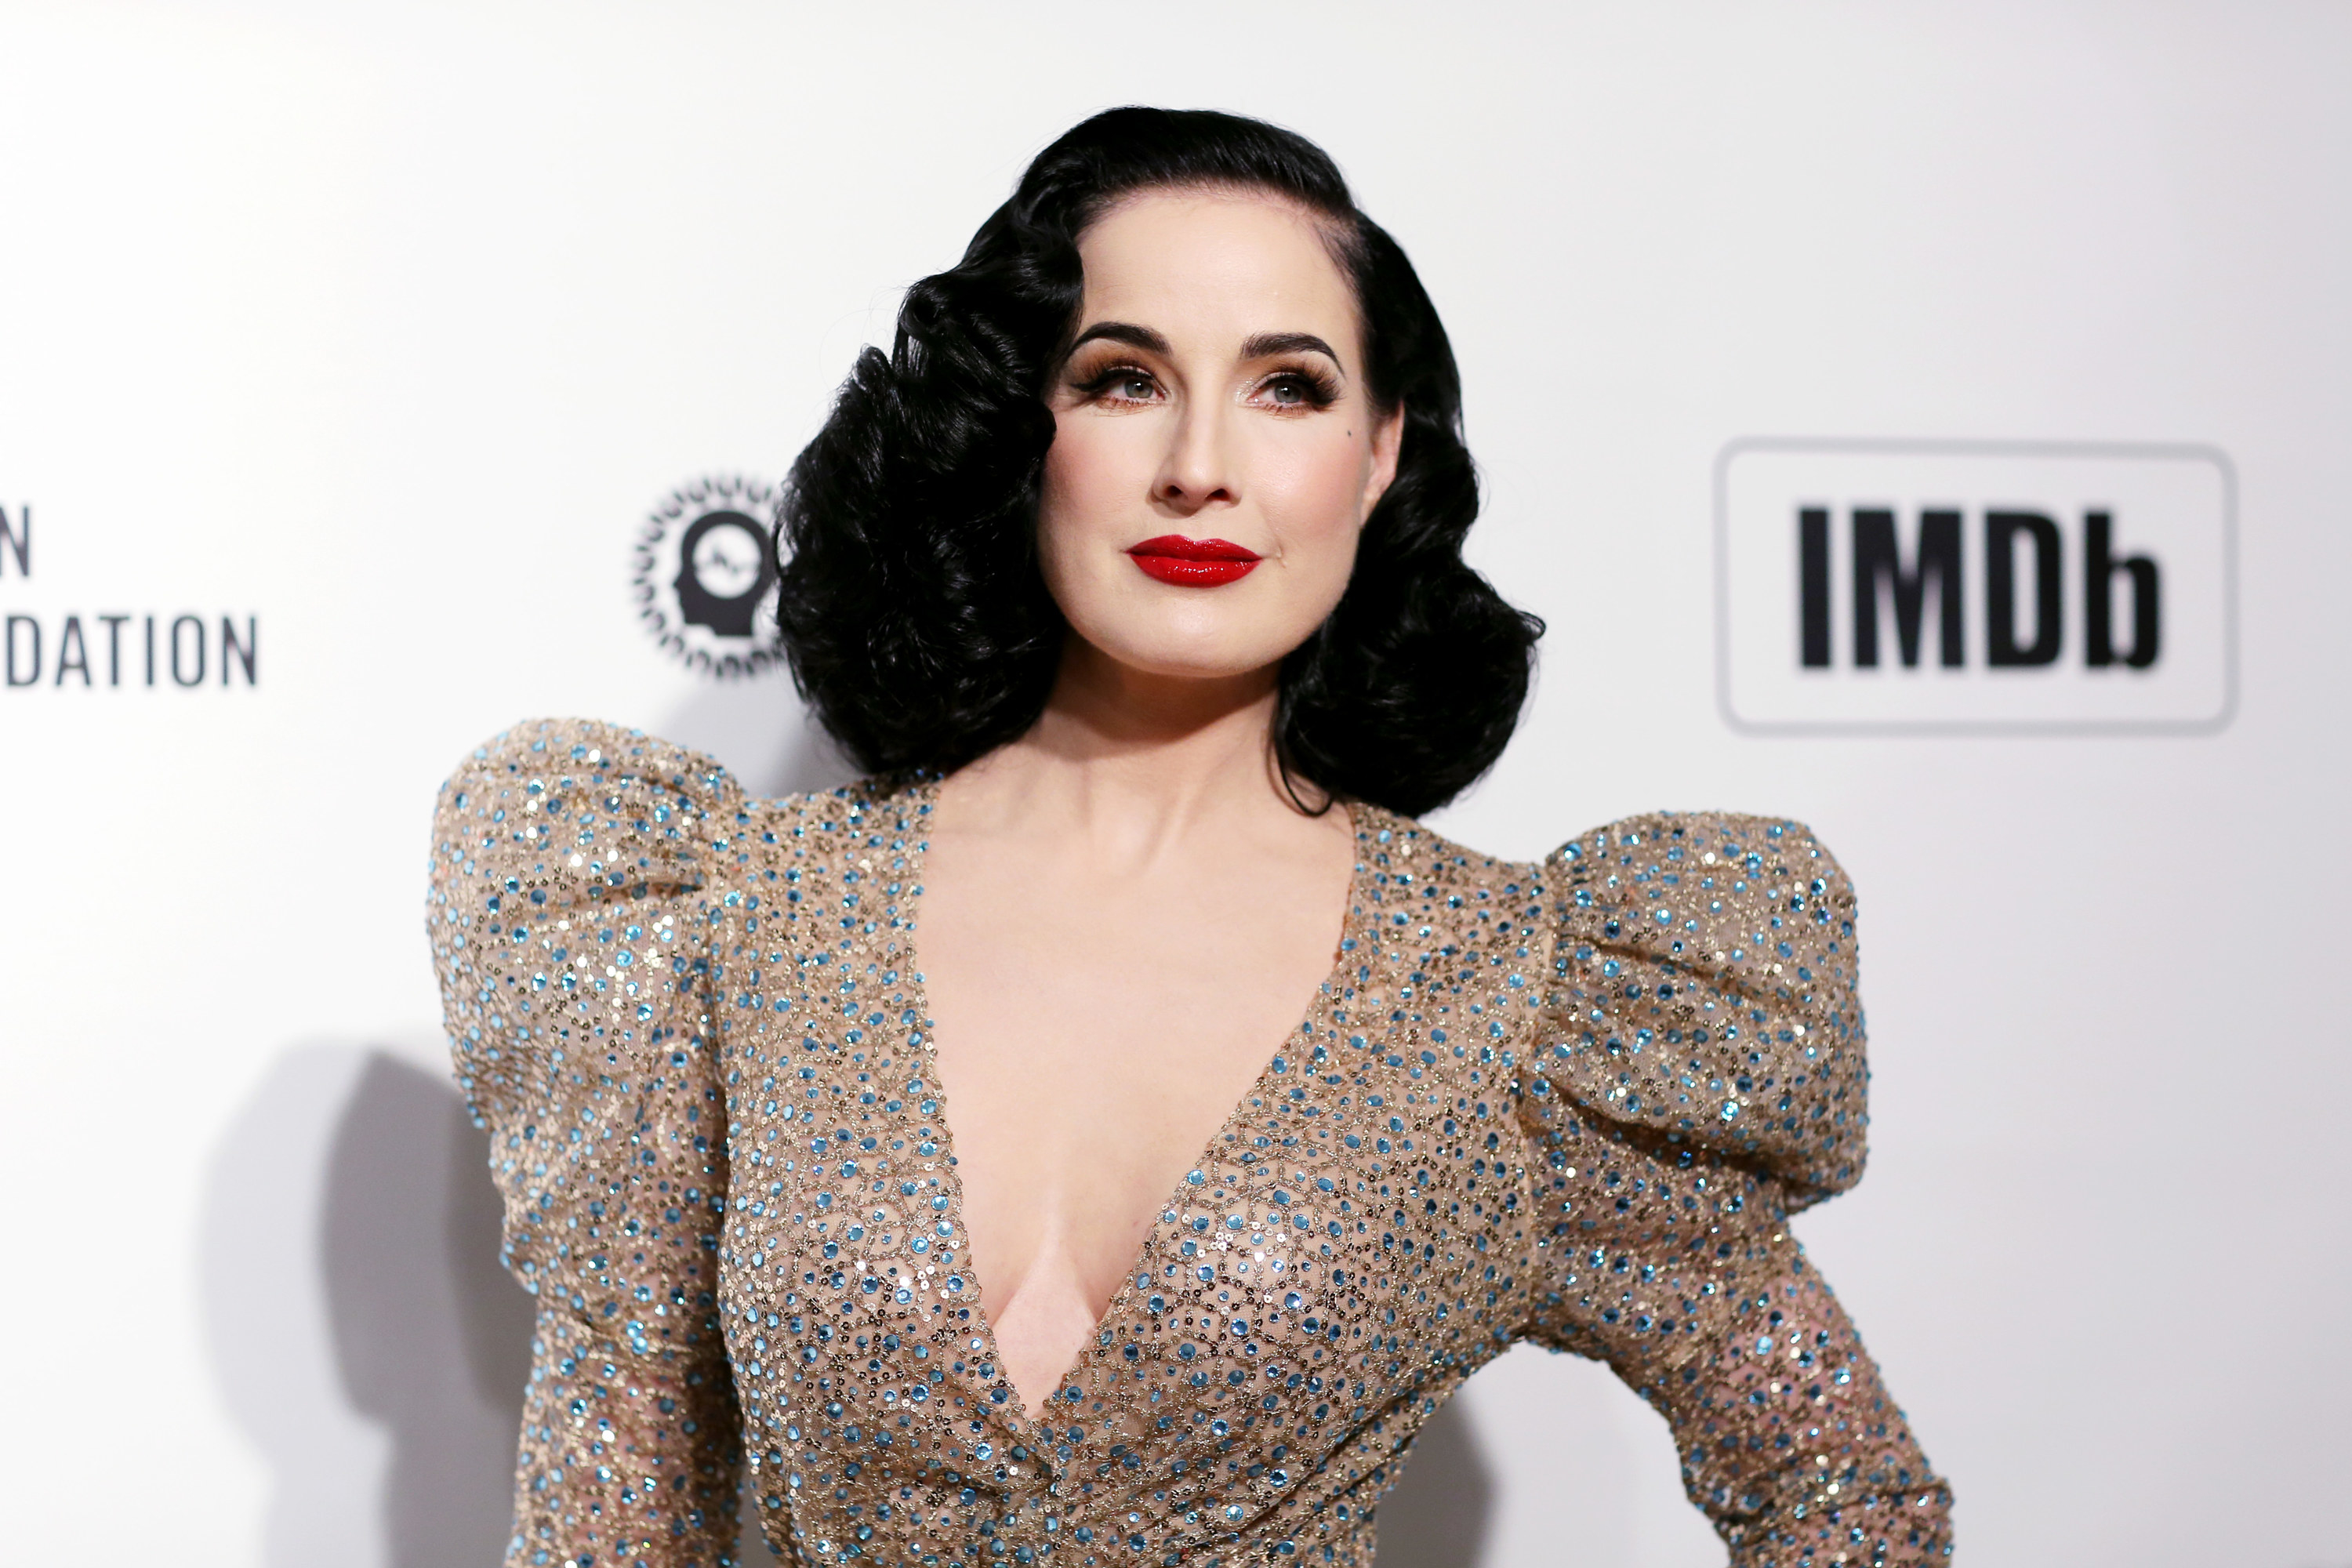 Dita Von Teese Addresses Marilyn Manson Abuse Allegations pic